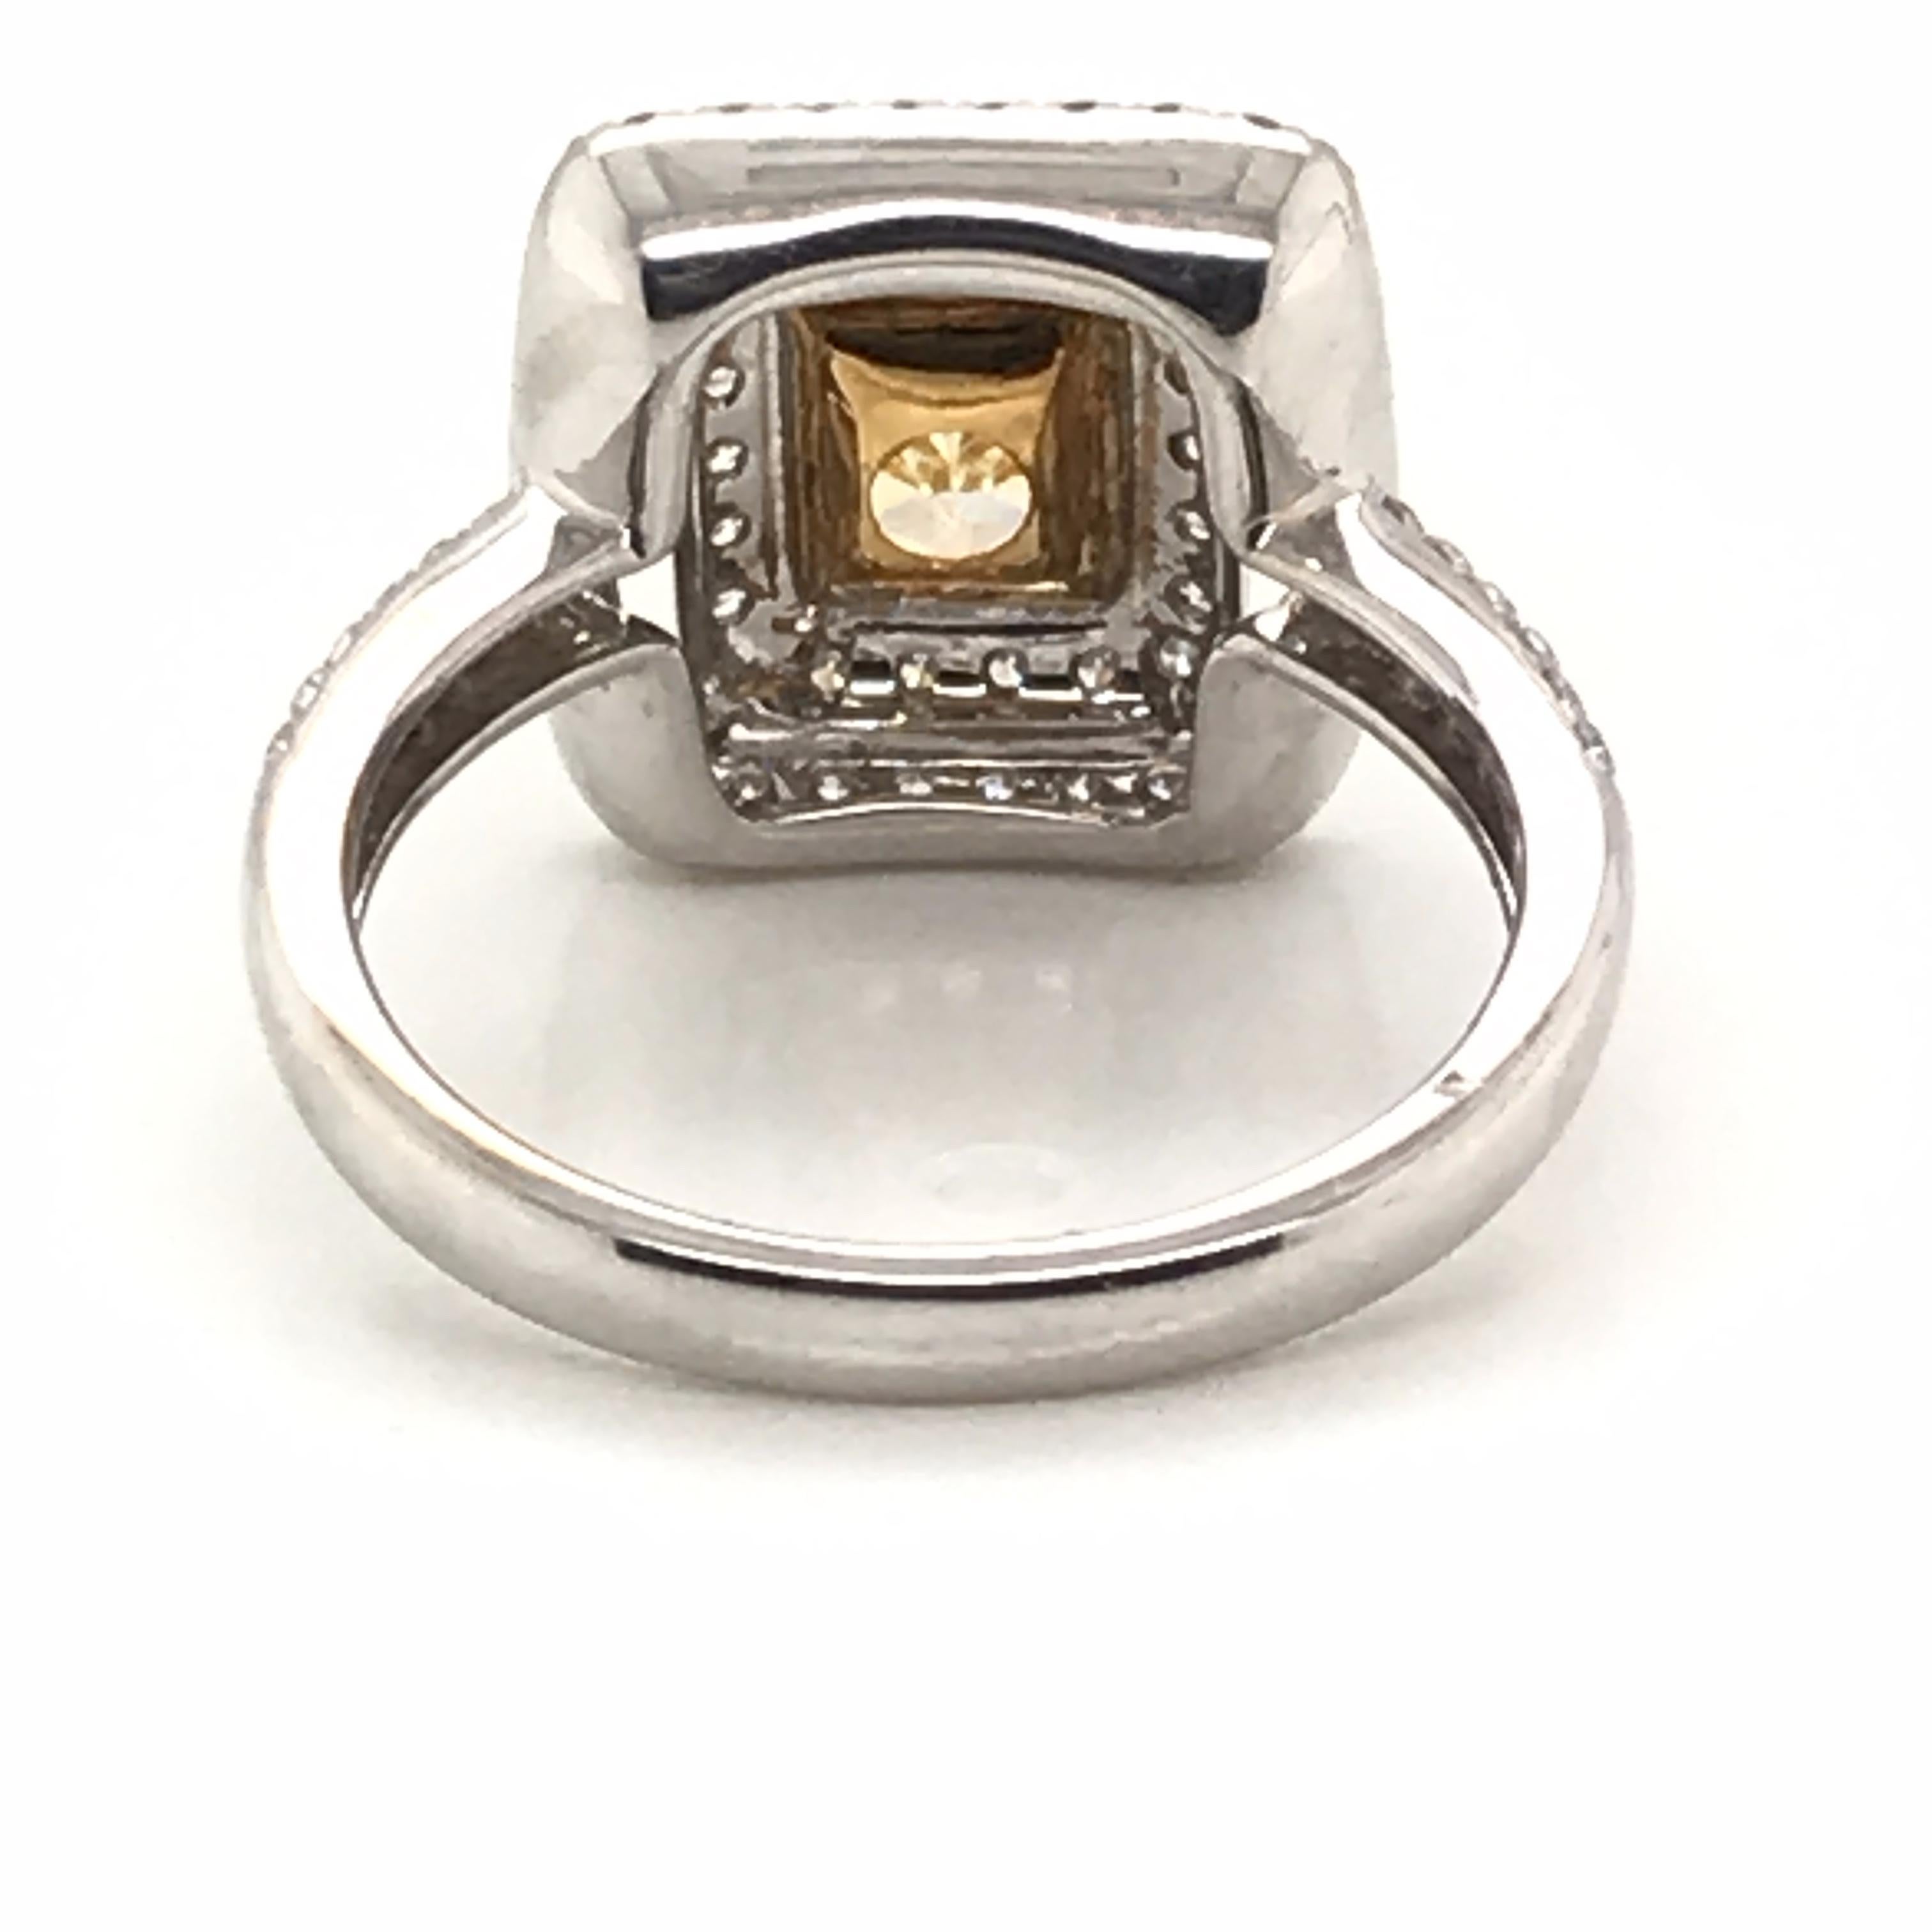 Women's 2.11 Carat Natural Fancy Yellow Diamond Ring with 18 Karat White and Yellow Gold For Sale